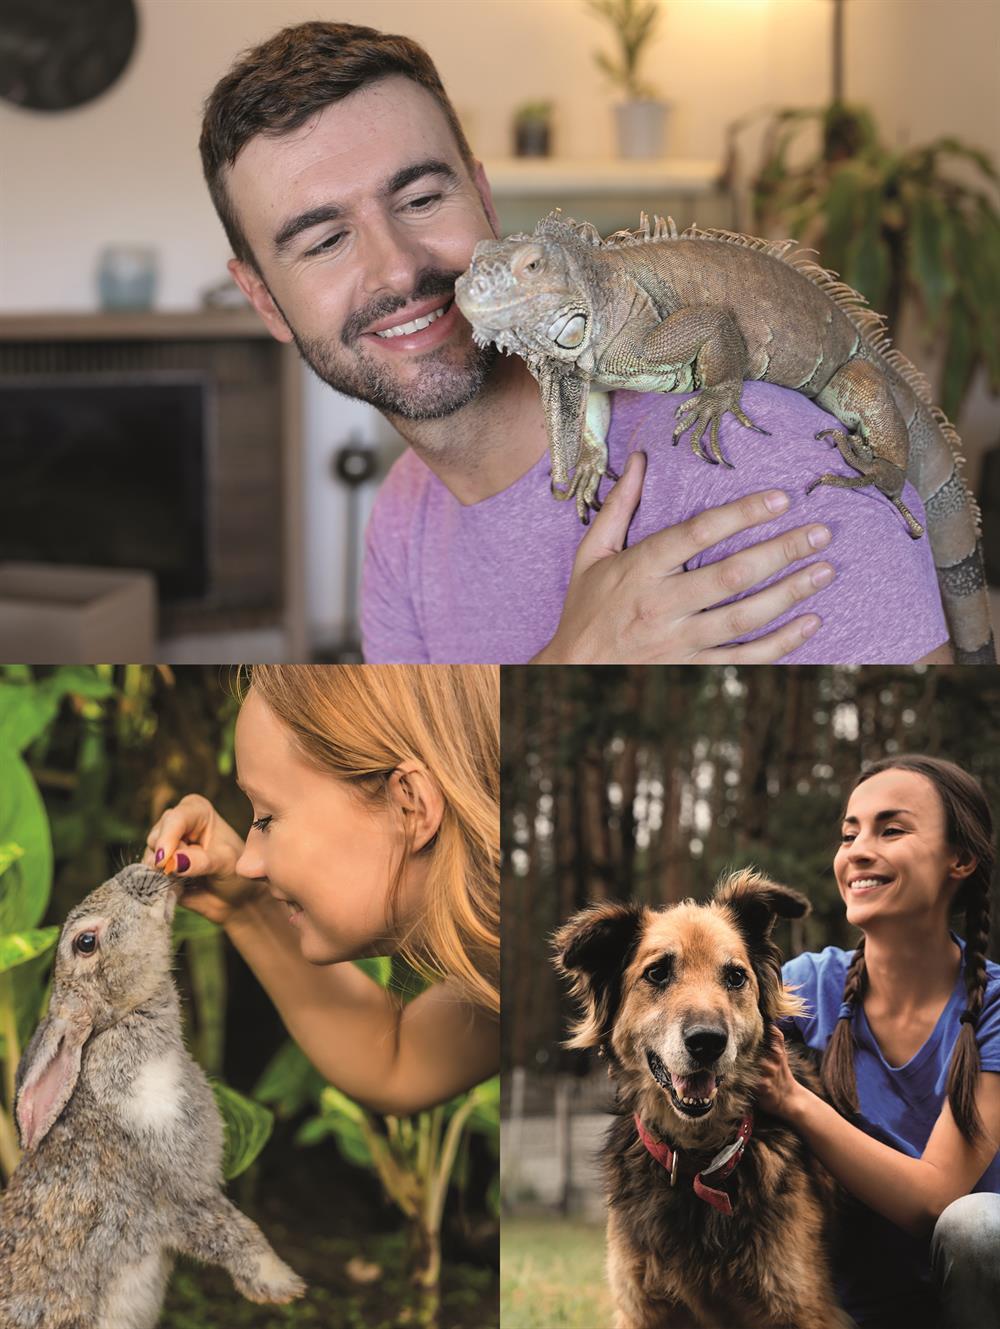 A range of one-day animal care courses are coming soon